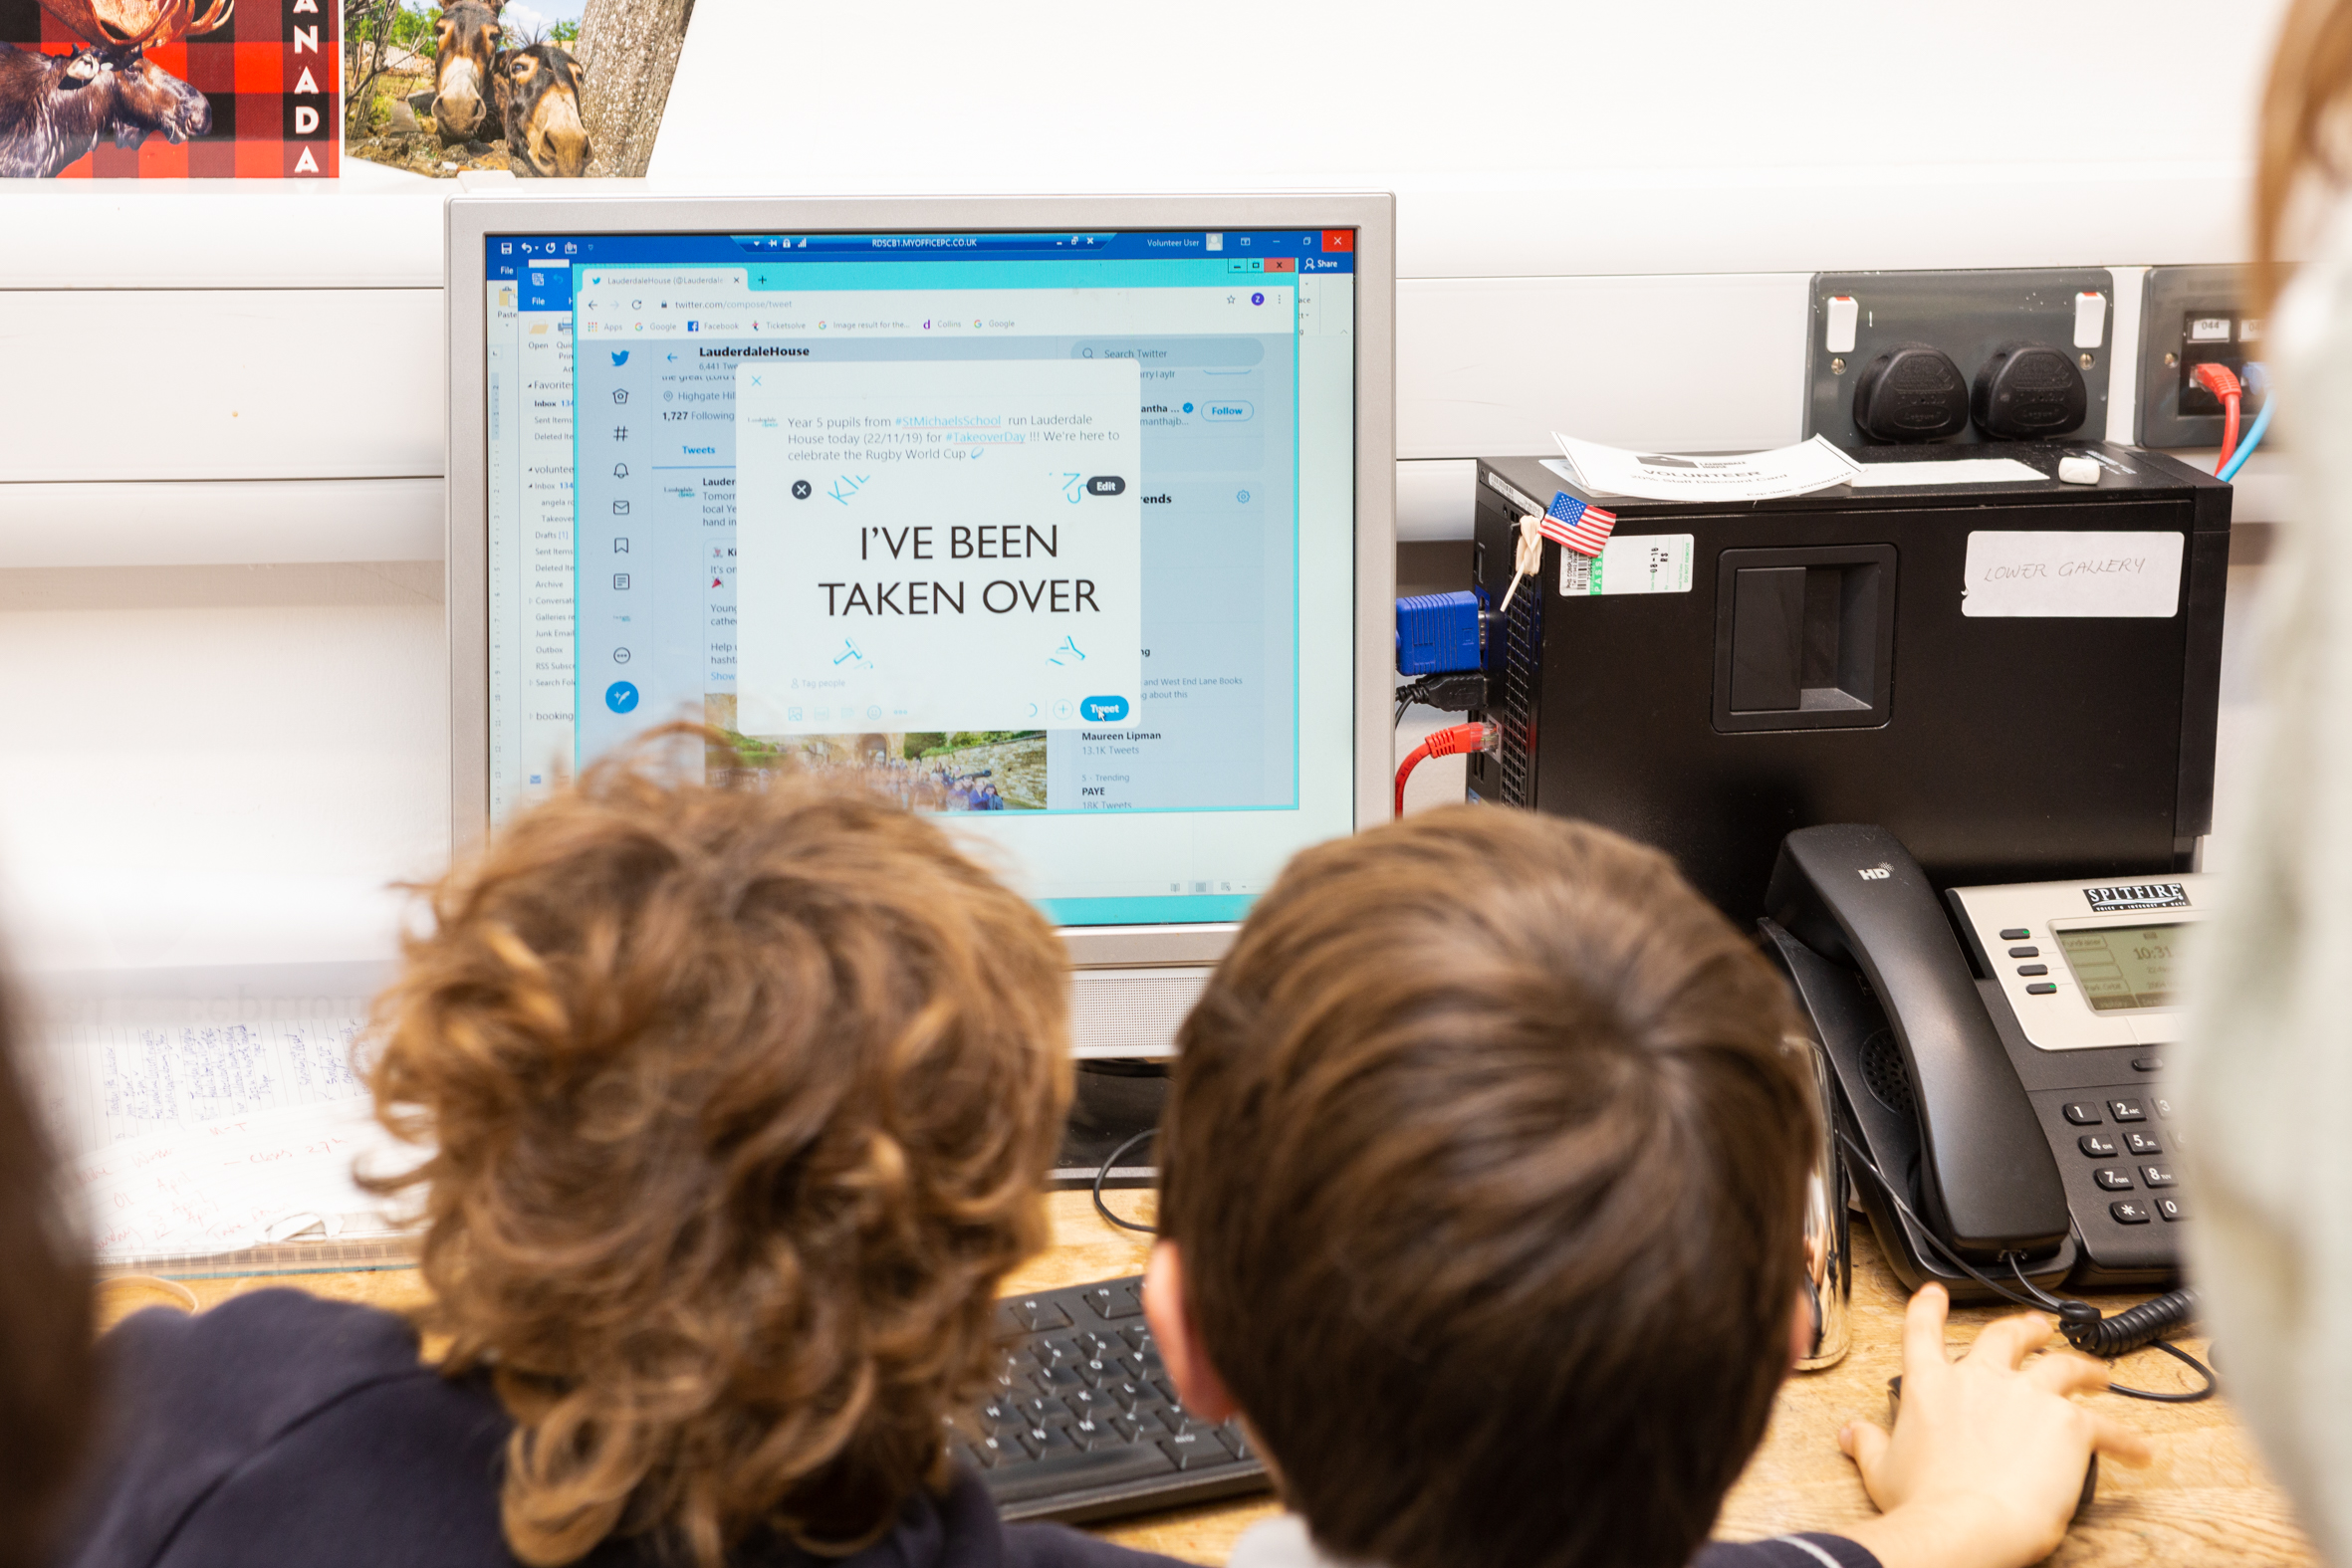 Two boys sitting facing towards a computer monitor where they are sending a tweet reading 'I've been taken over'' during the Lauderdale house Takeover Day.